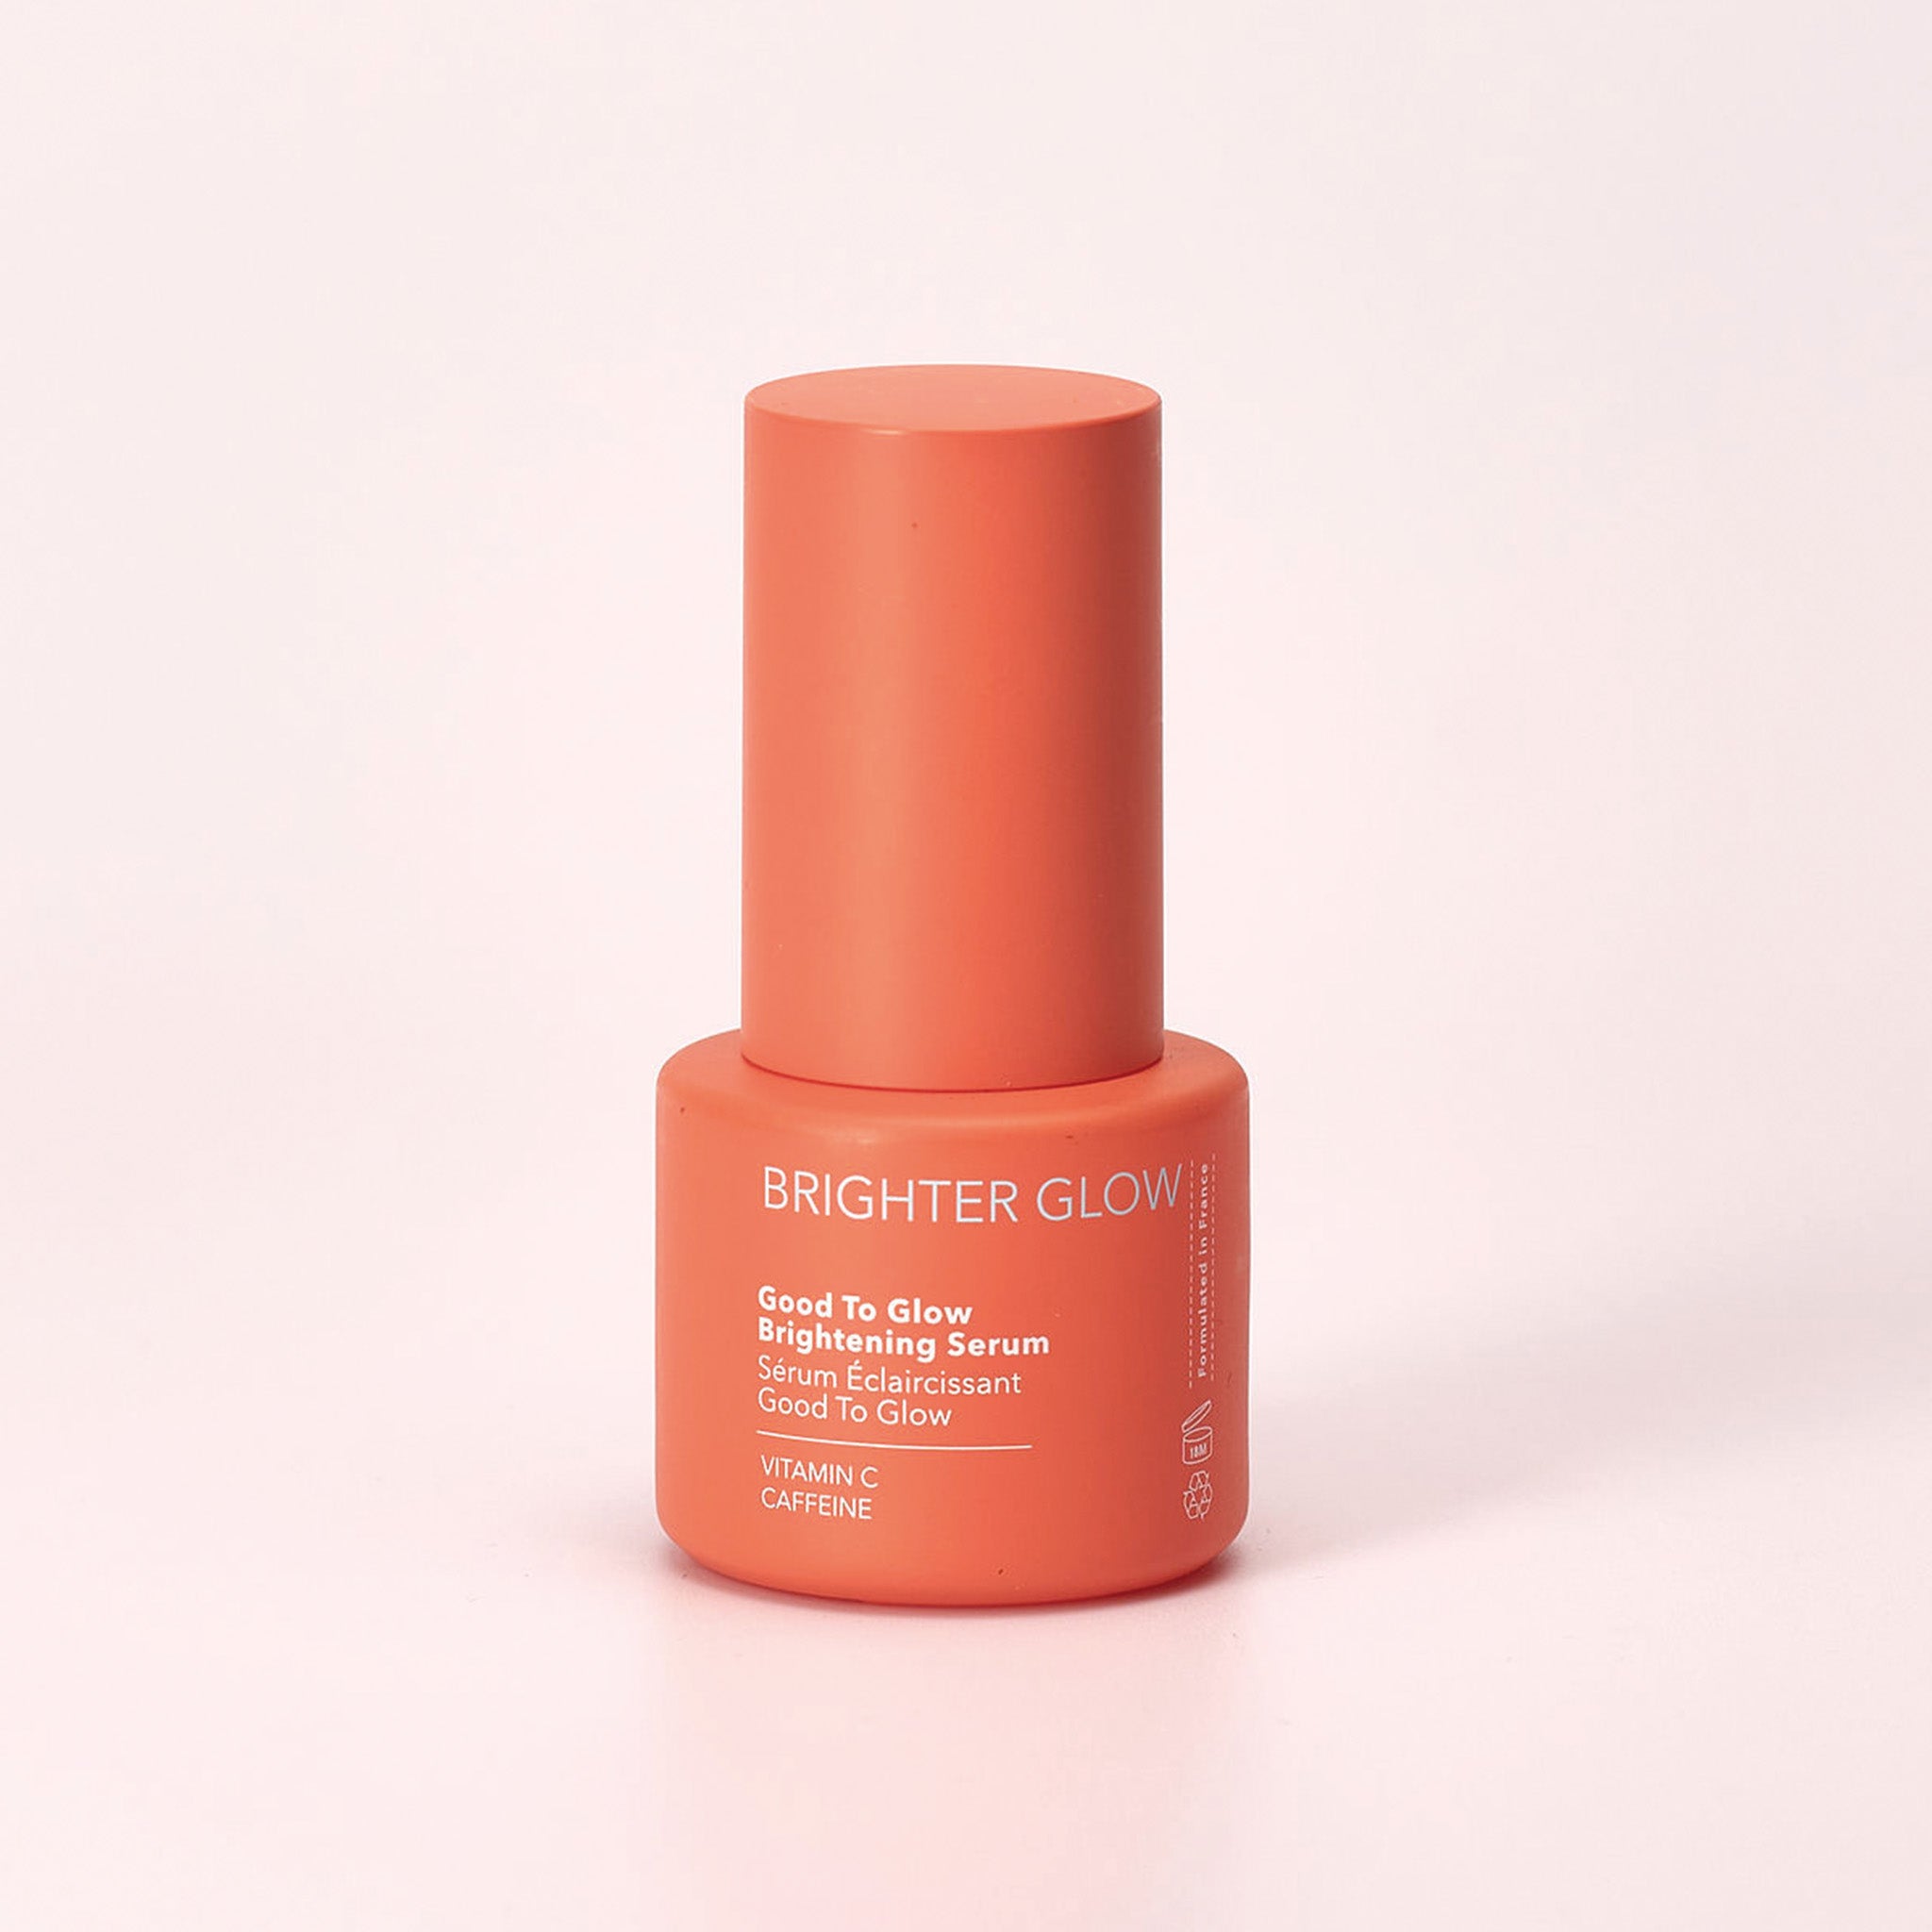 soul-sisters-brighter-glow-good-to-glow-brightening-serum-15ml-front_be1650ad-2fe5-49a5-913d-d65324872be0.jpg